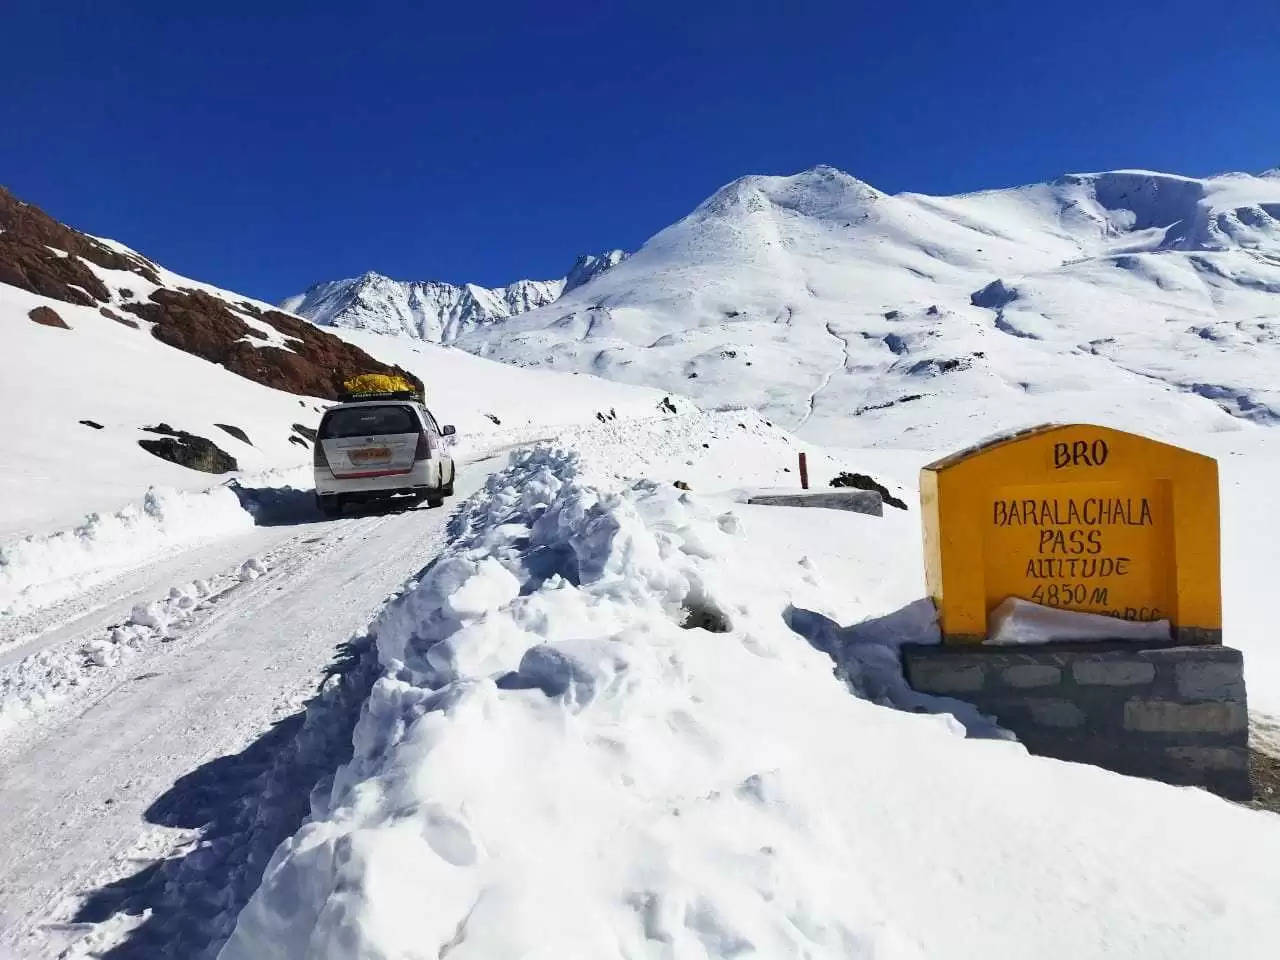 Due to a lot of snow, the Manali-Leh roadway was blocked.